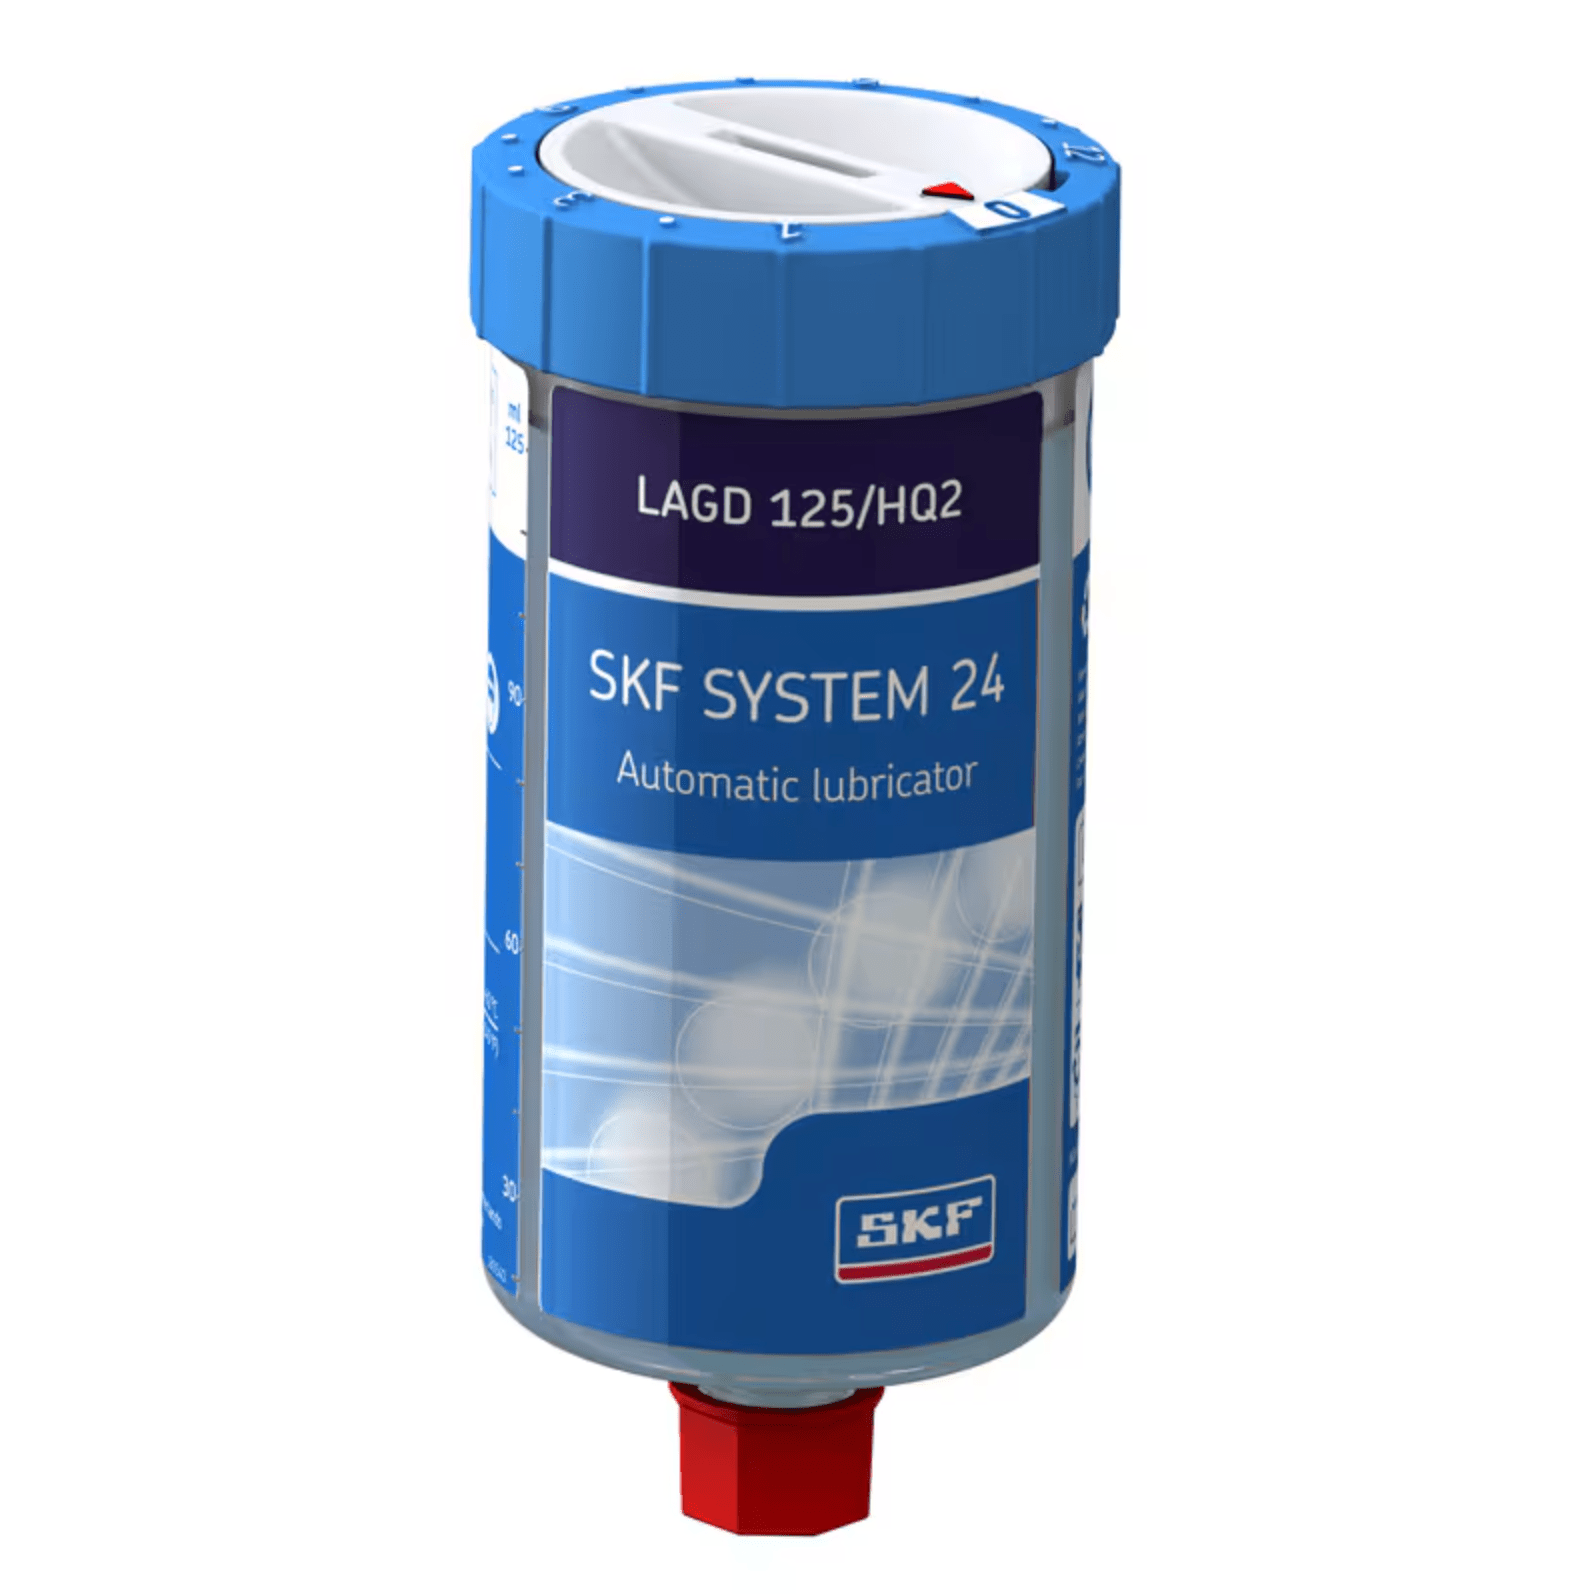 SKF LAGD 125/HQ2 Automatic lubricator with LGHQ 2 High performance, high temperature grease, 125ml - Apollo Industries llc